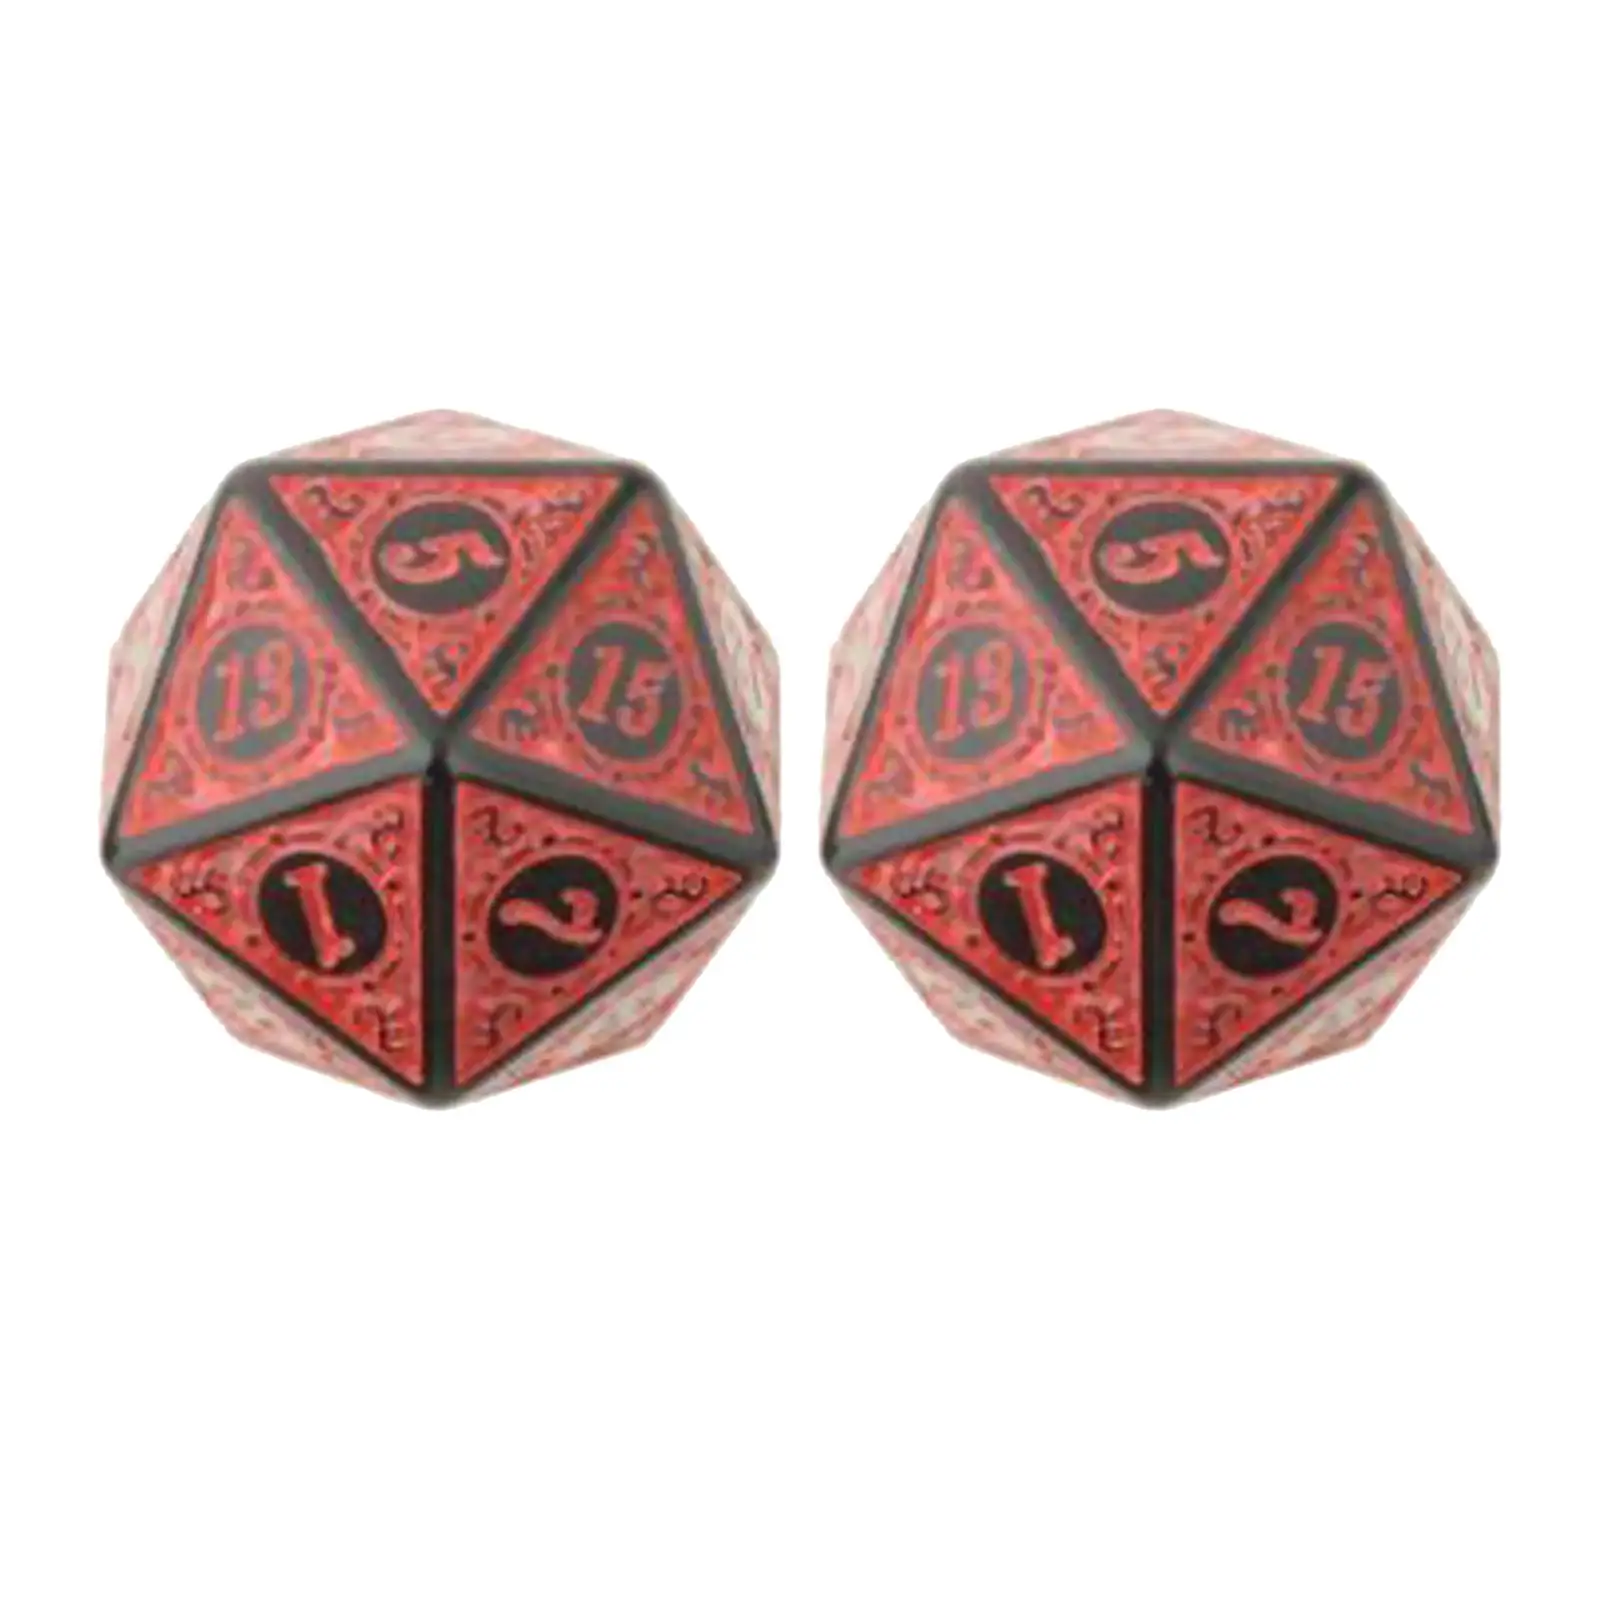 20 Sided Polyhedral Dice 10 Pieces Dice Set English Letters Acrylic Unique 20 mm for Dice Games Roleplaying Party Game